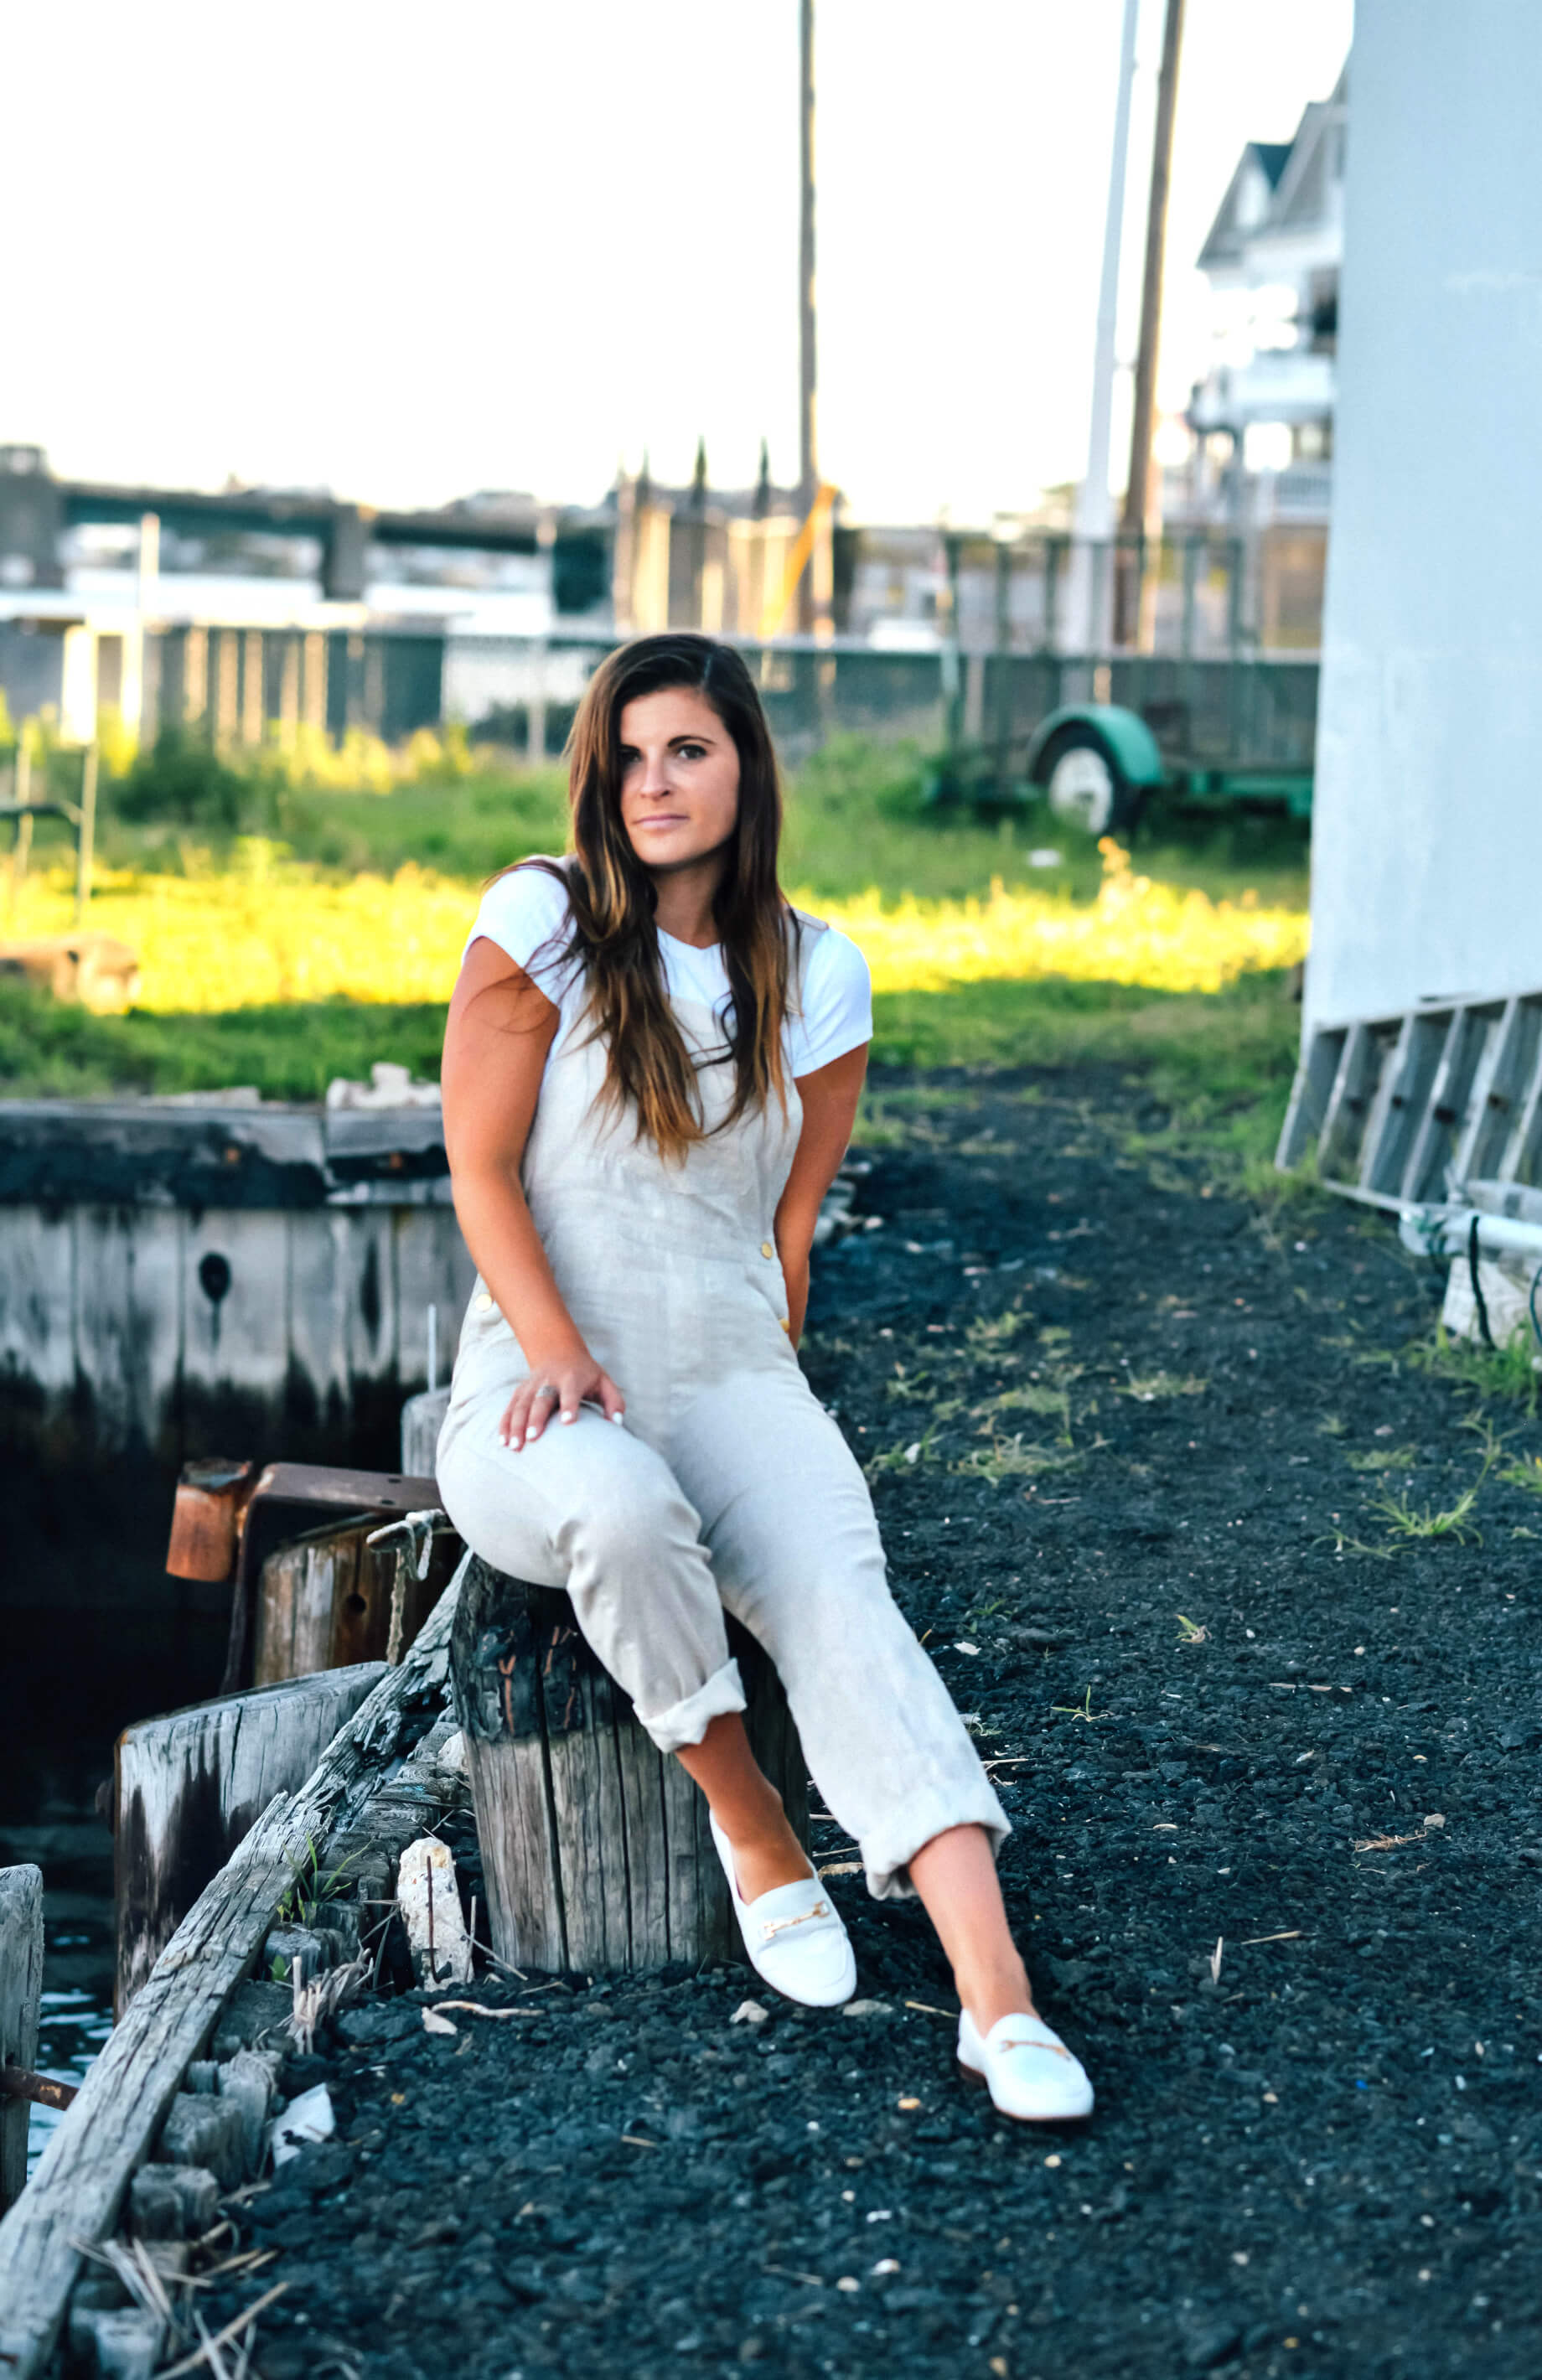 SSO By Danielle Neutral Linen Basic Overalls, Sam Edelman Loraine White Bit Loafer, Summer Outfit, Tilden of To Be Bright